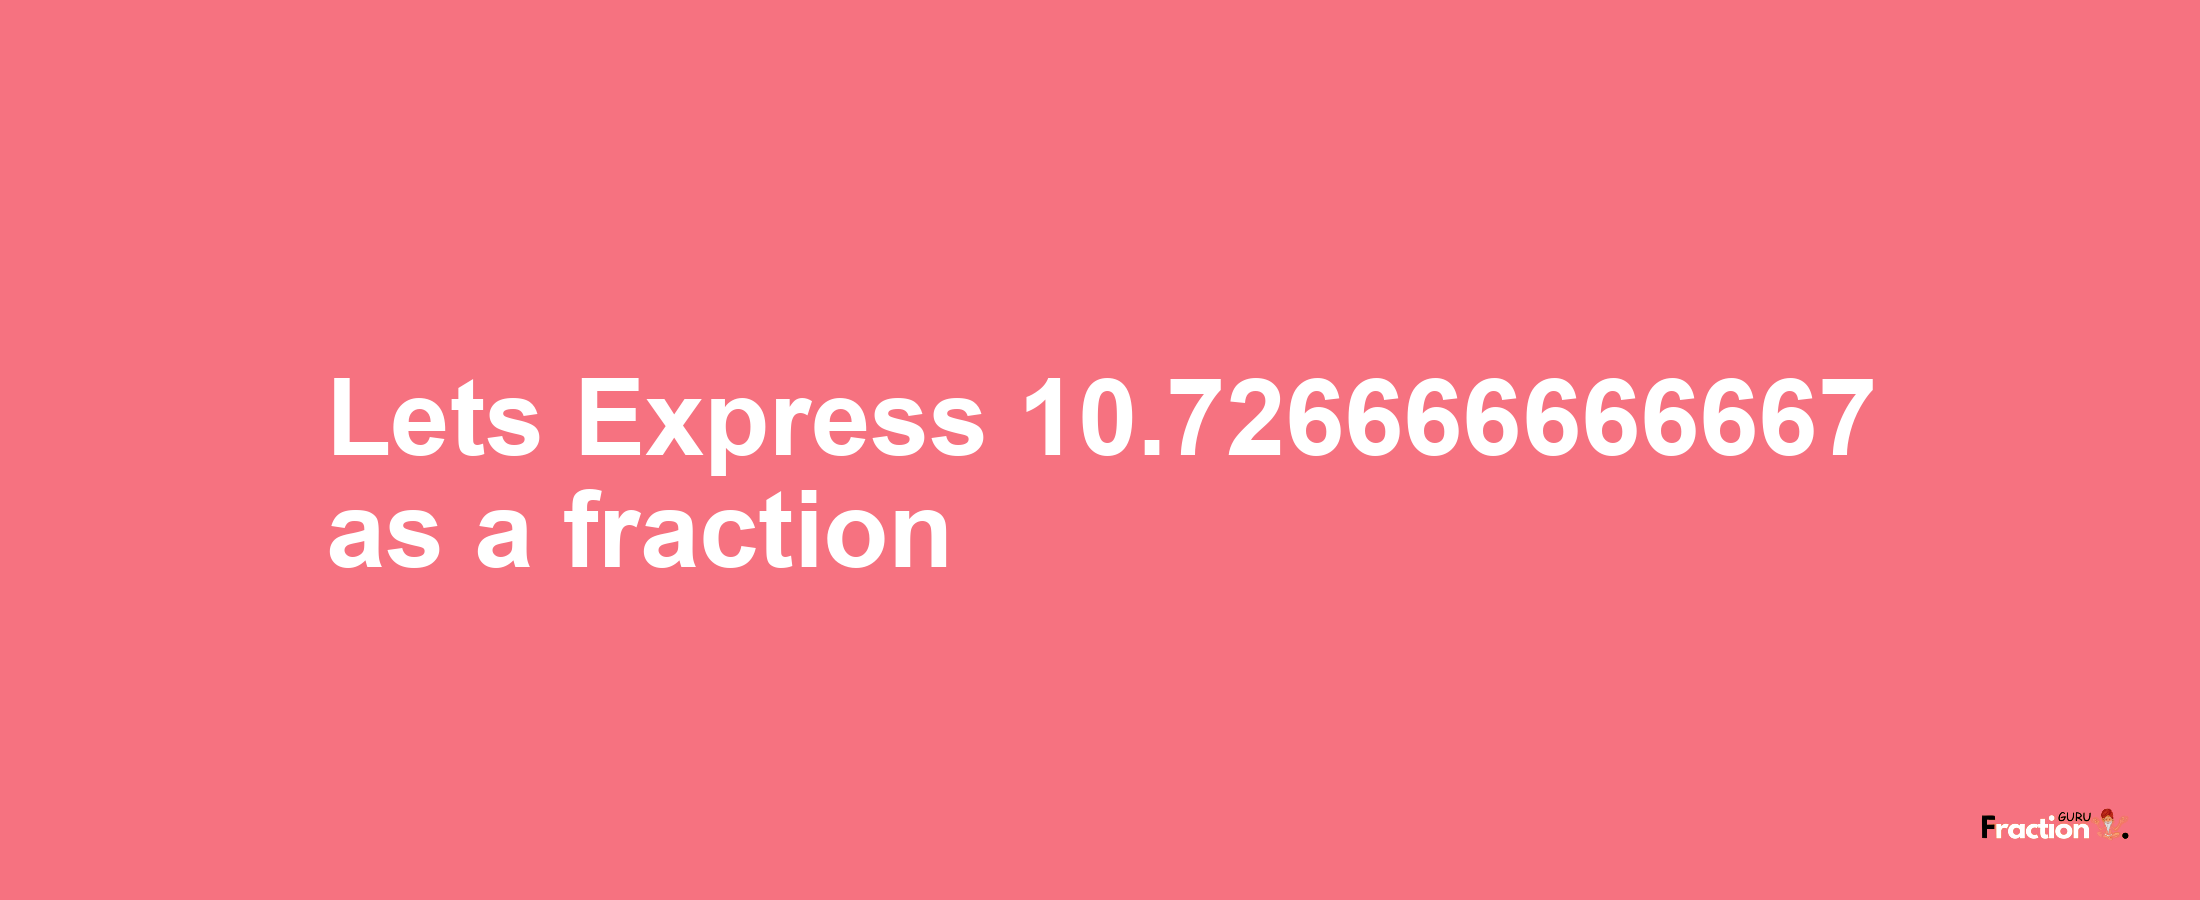 Lets Express 10.726666666667 as afraction